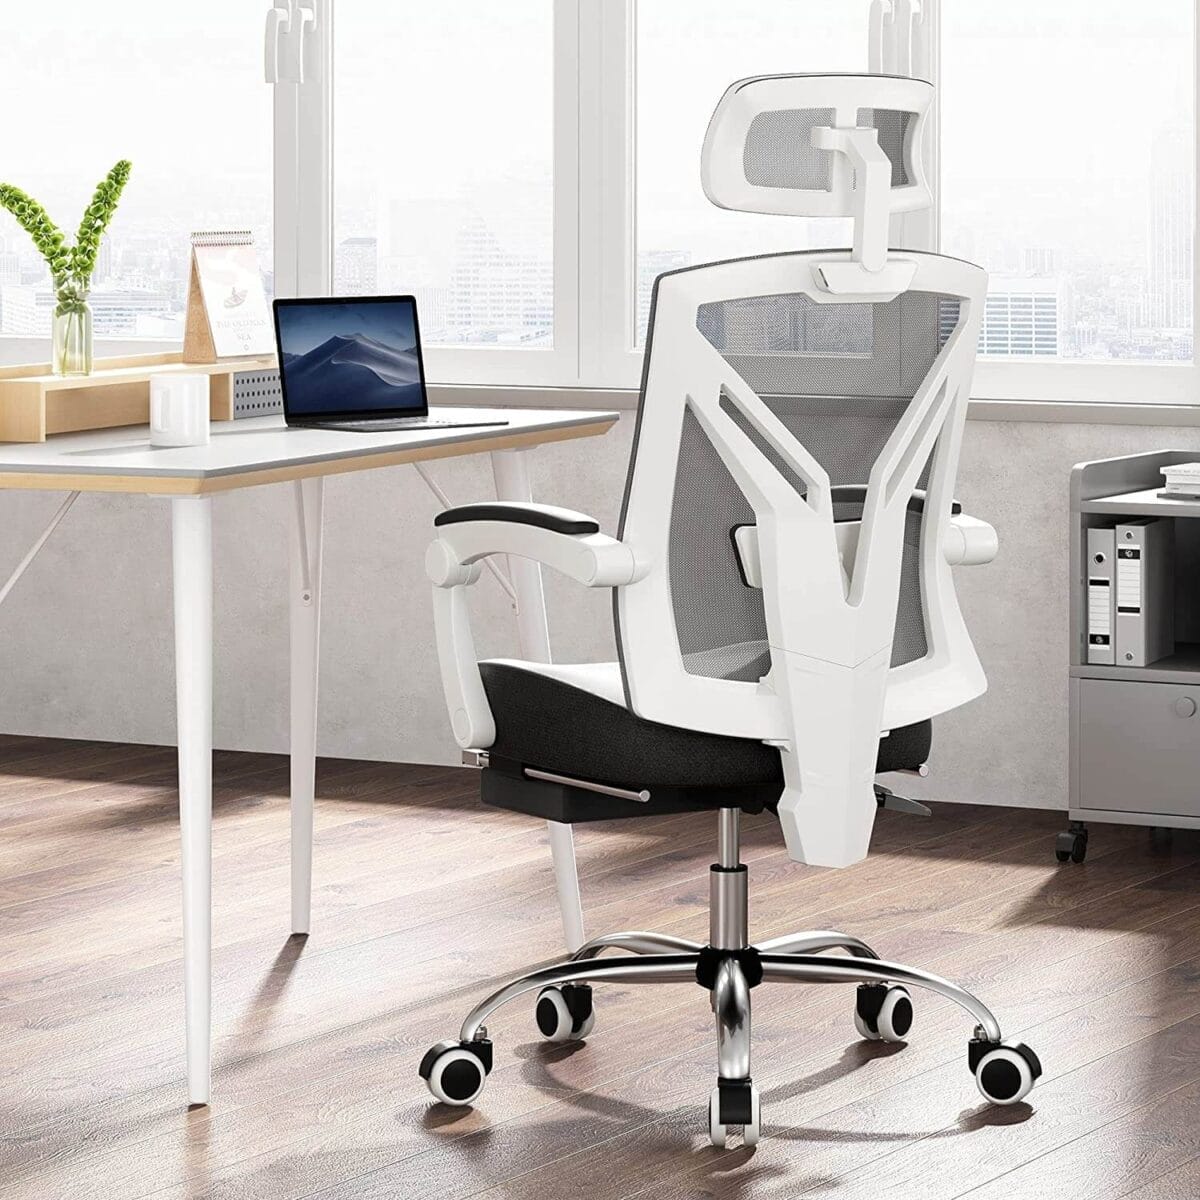 Recliner High Back Ergonomic Office Chair by Hbada (Lifestyle)